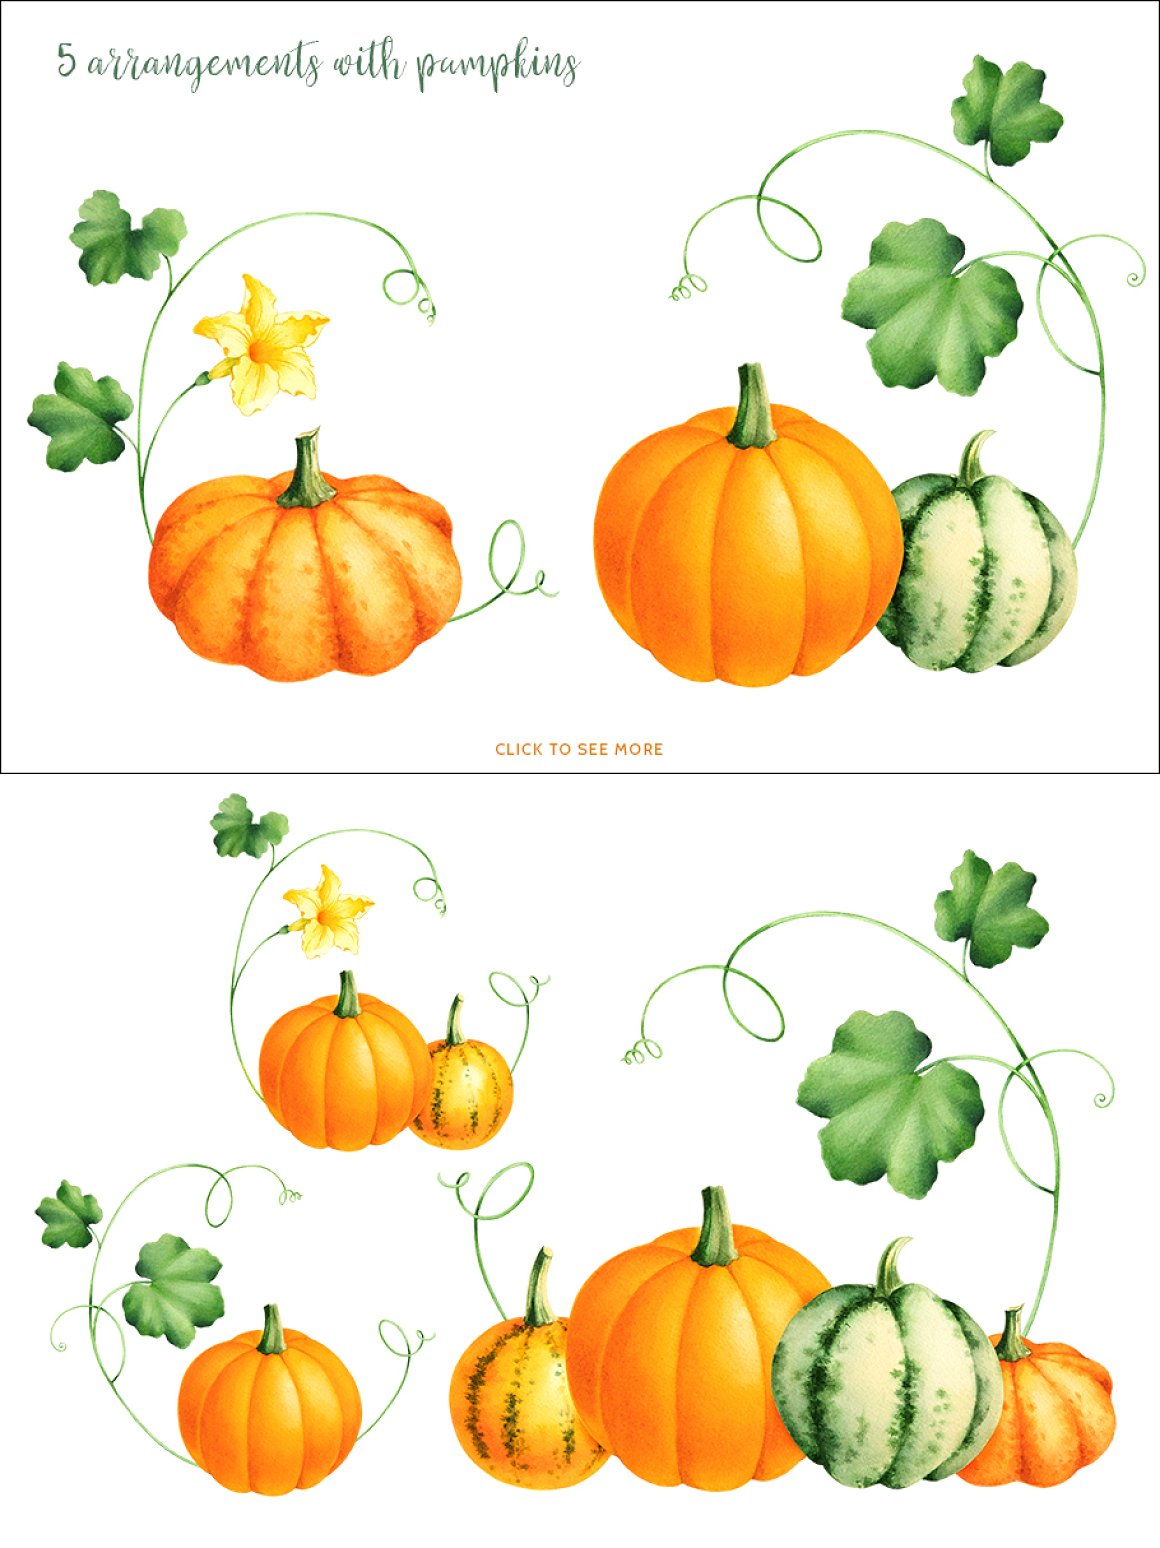 Various of shapes pumpkins and colors.